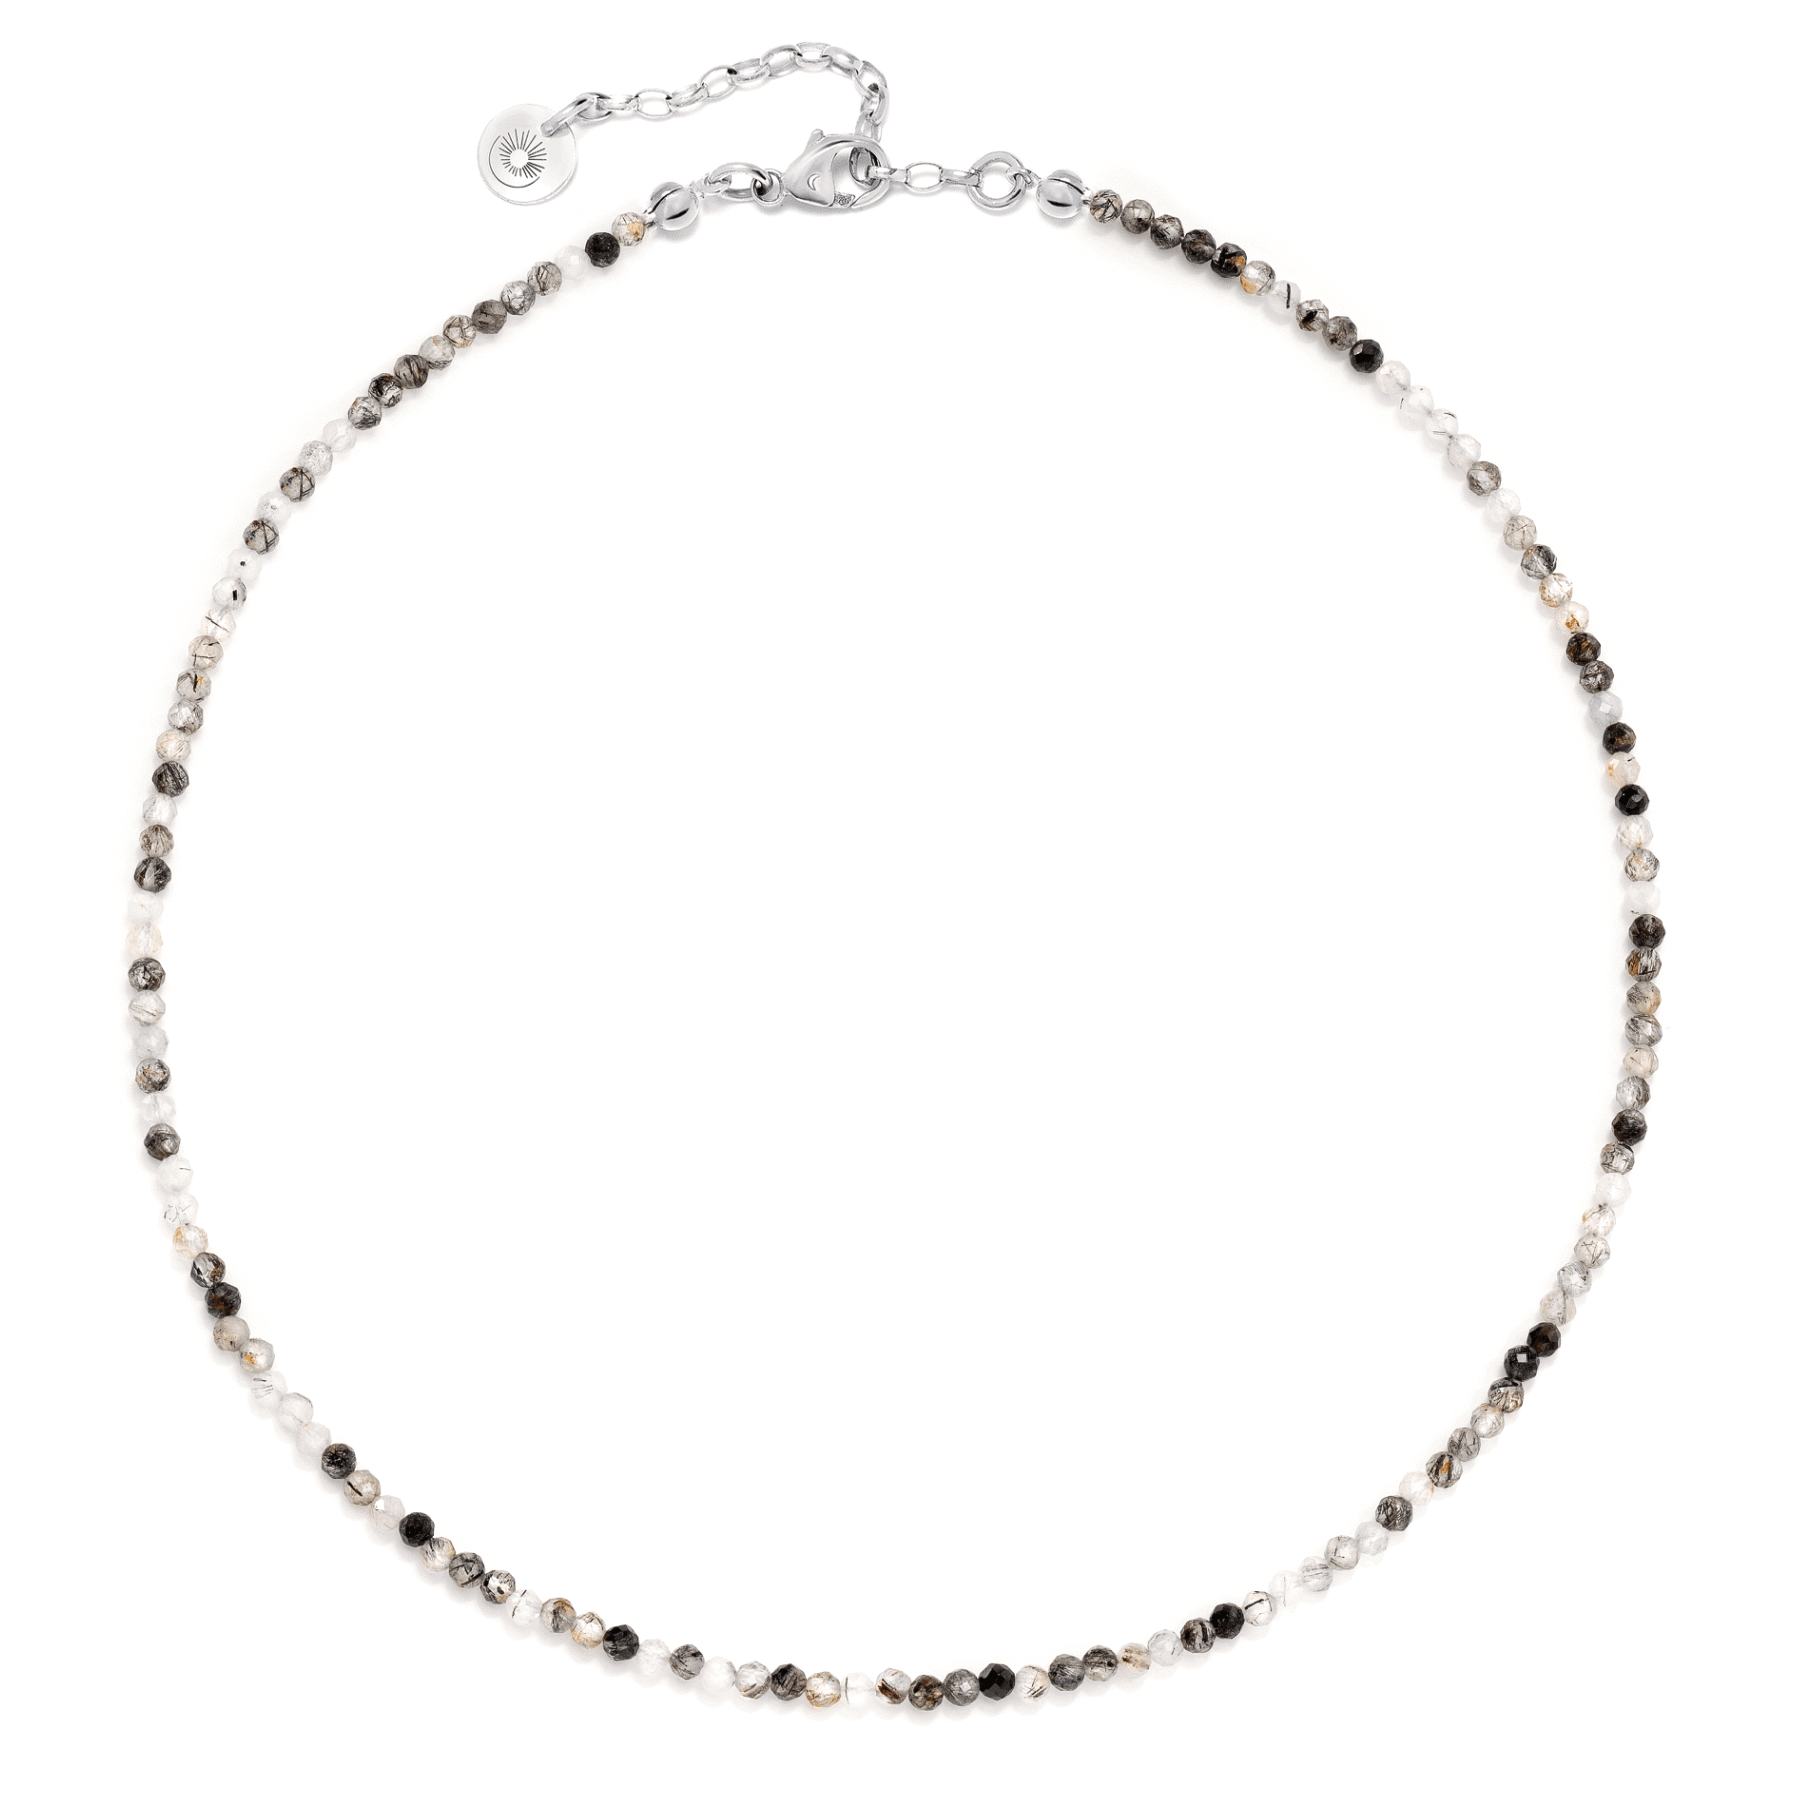 Neck choker made of quartz stones with rutile on a light background